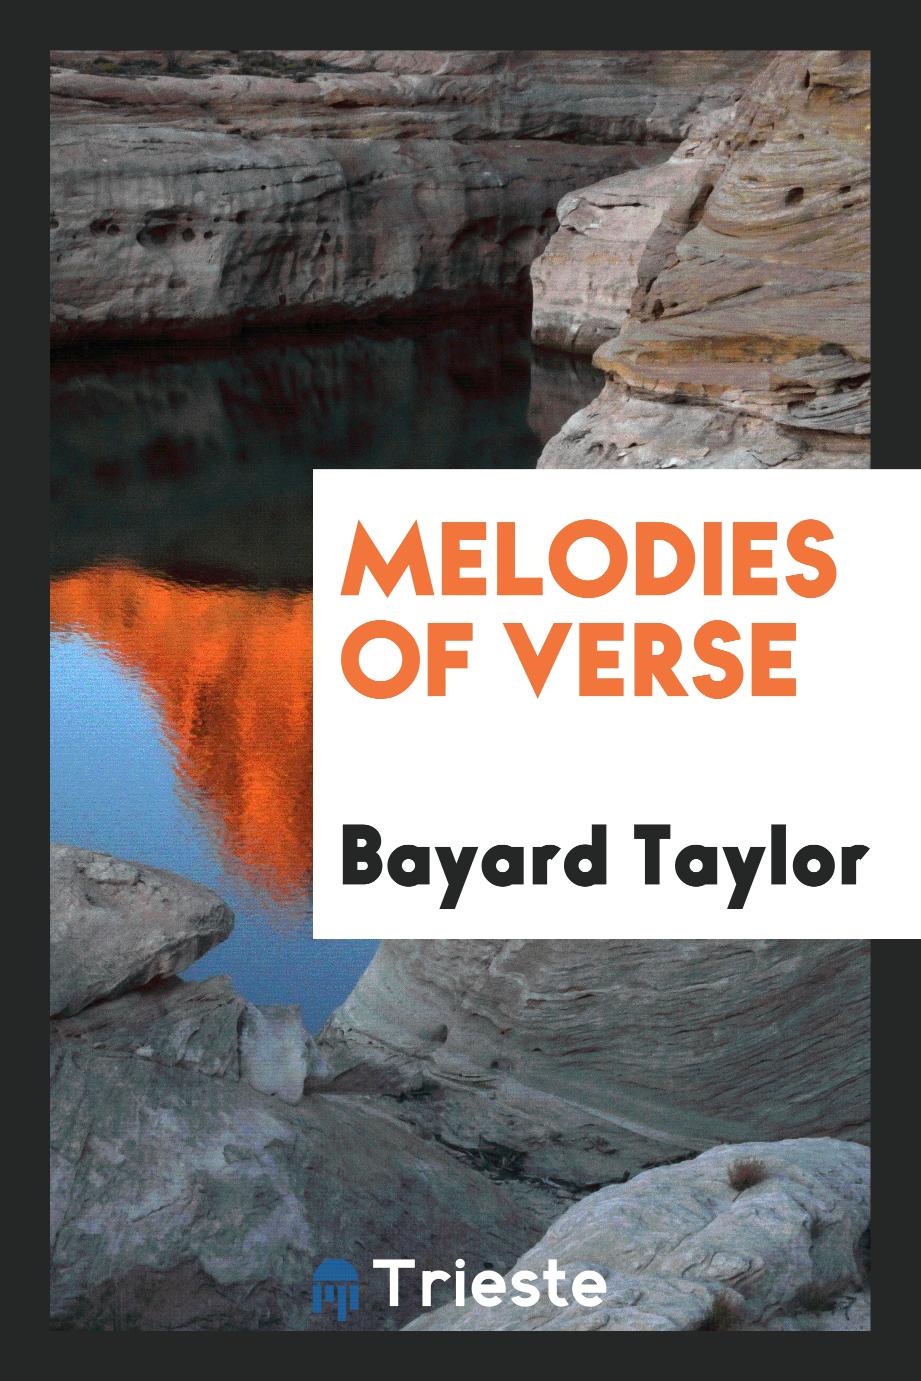 Melodies of Verse